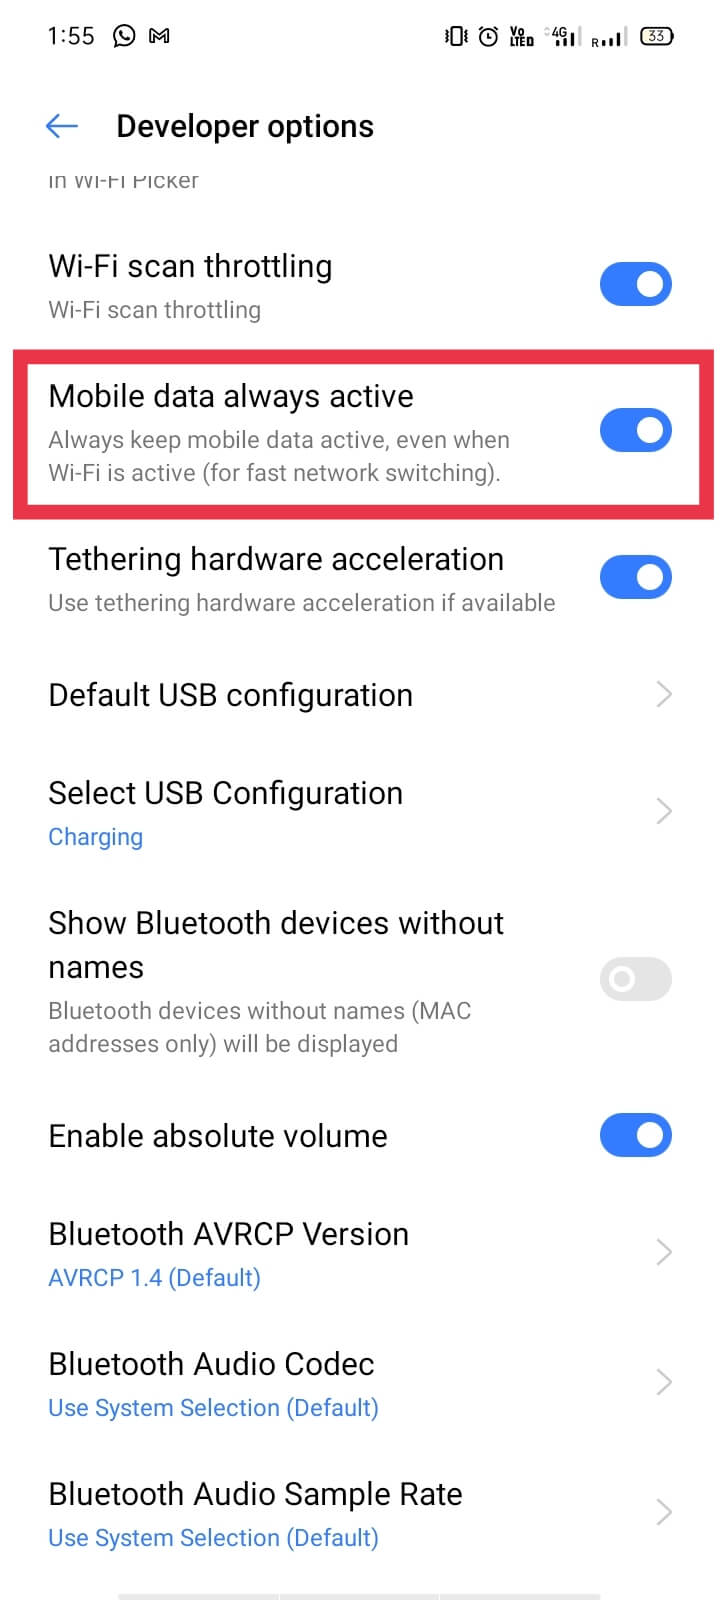 Now, under the Developer option, turn on the Mobile data always active option.